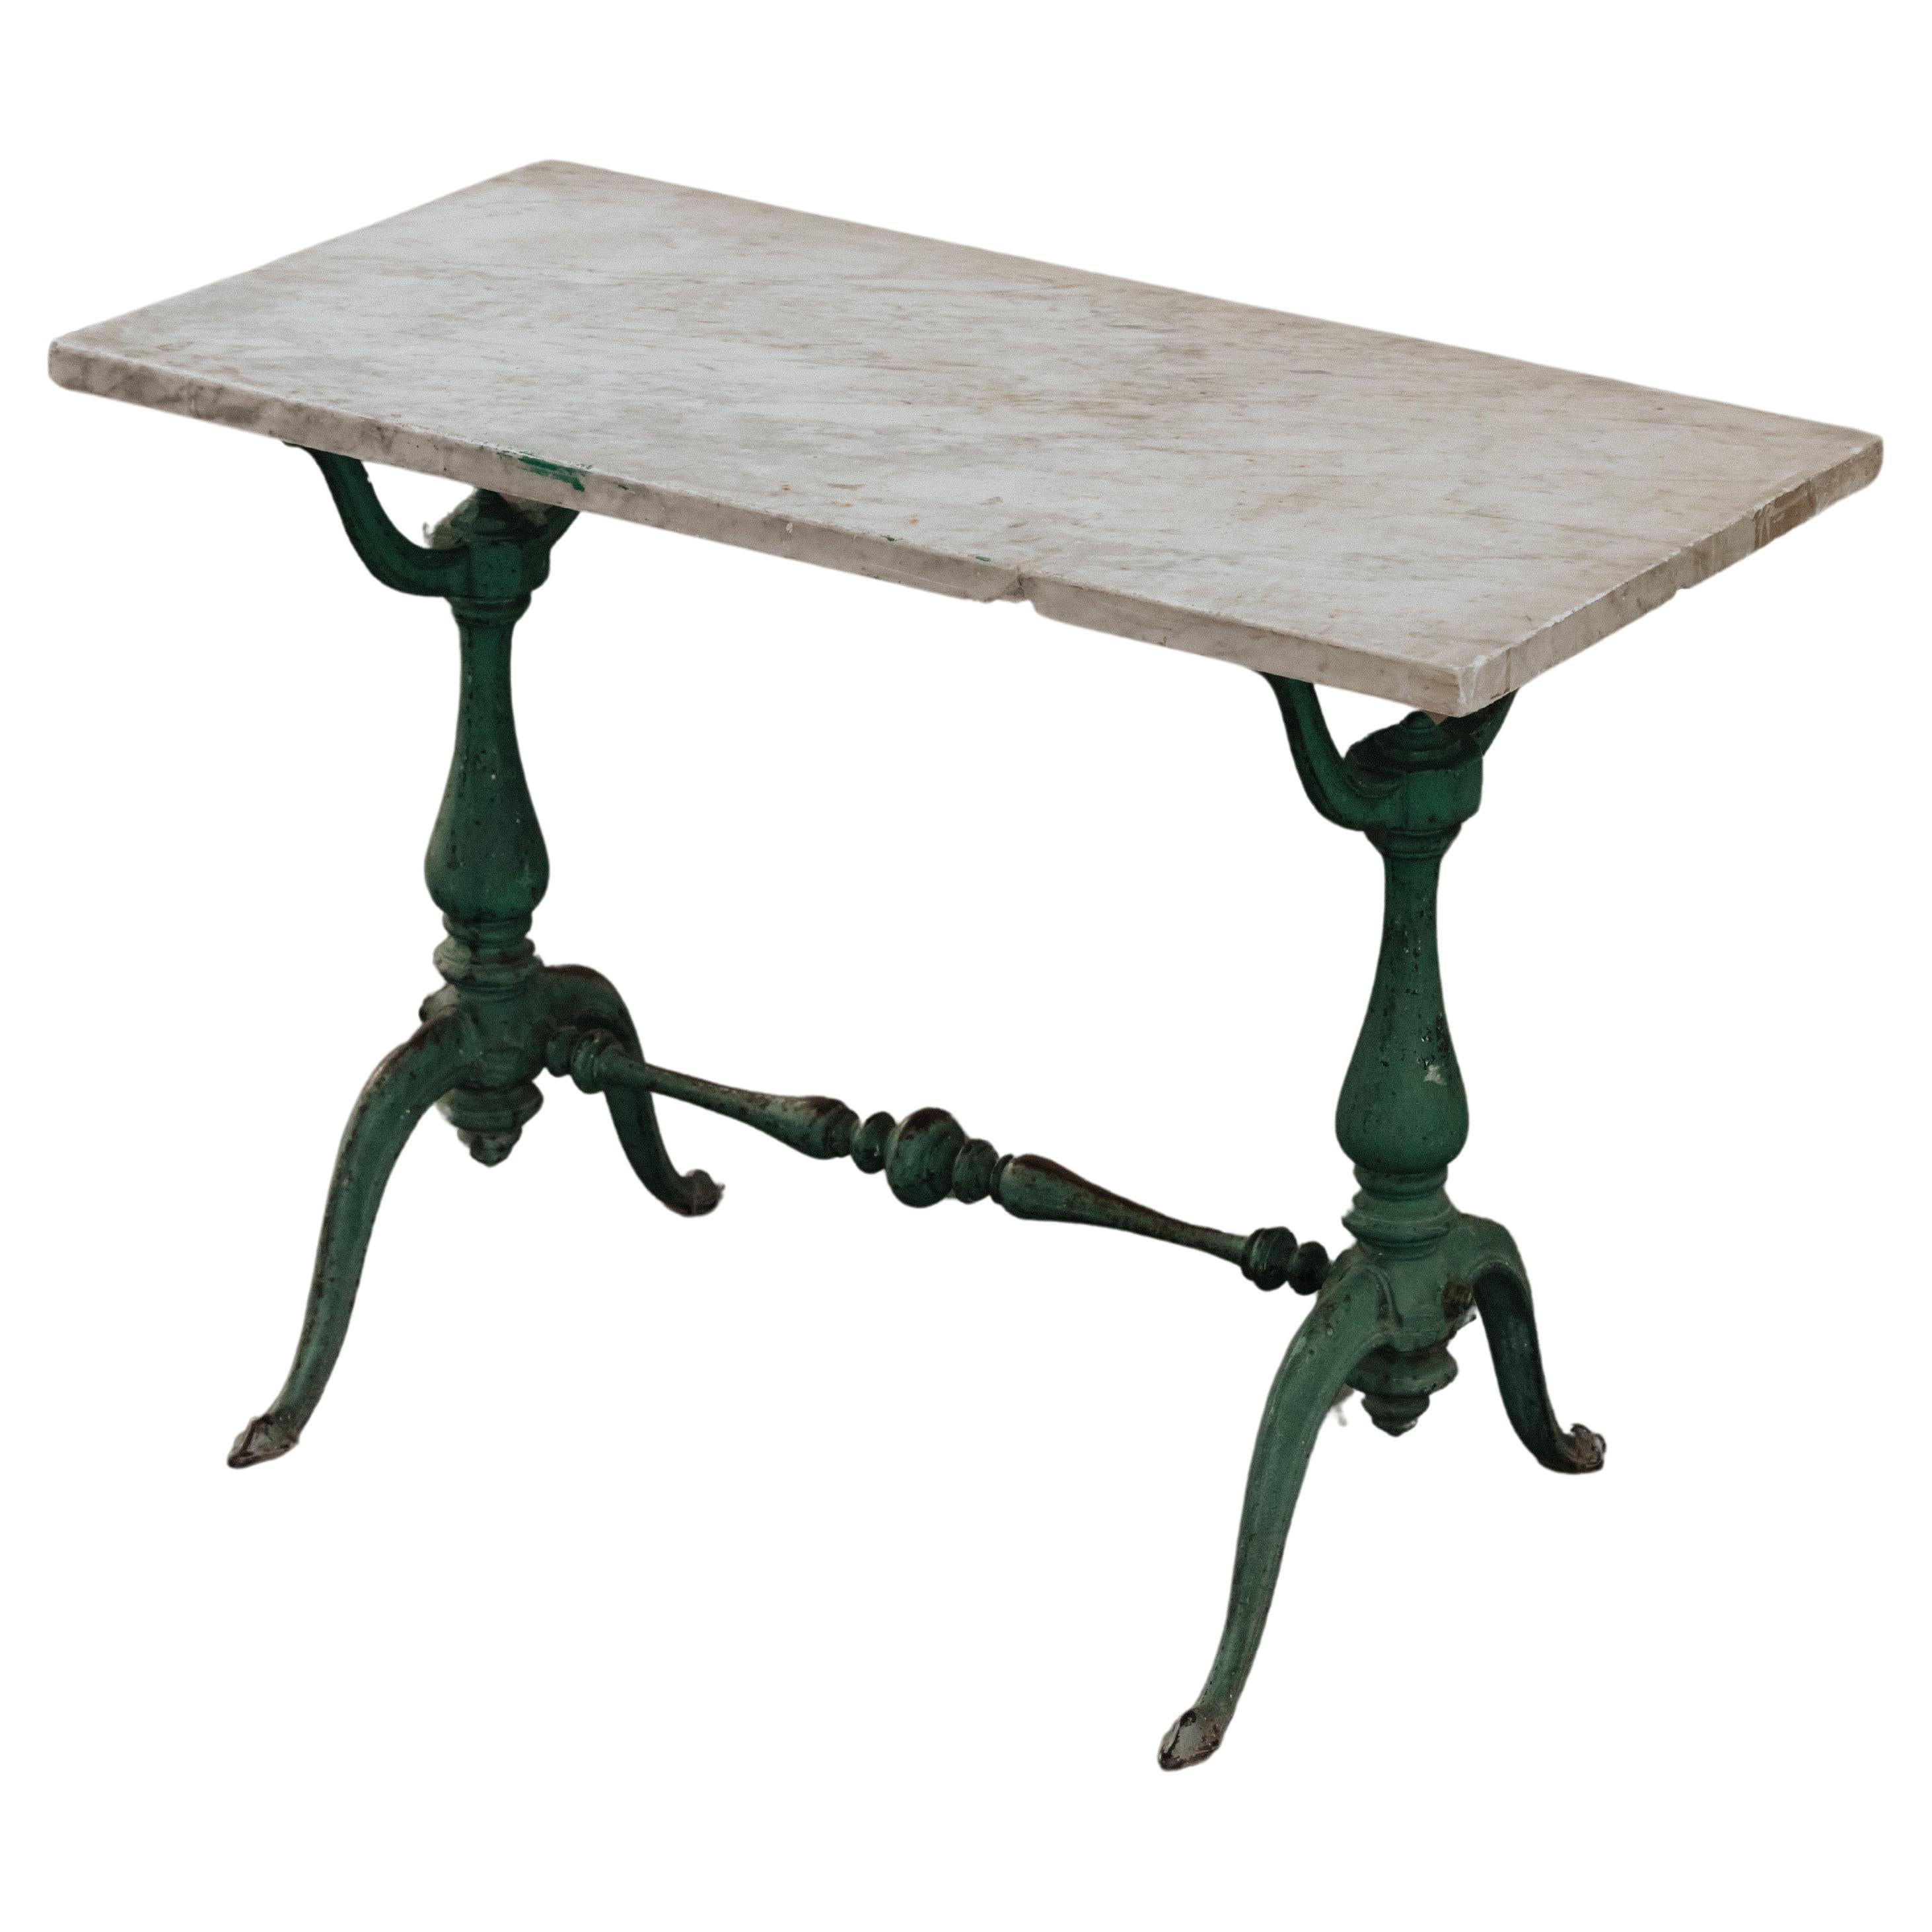 Early Cast Iron Marble Console Table From Italy, Circa 1880